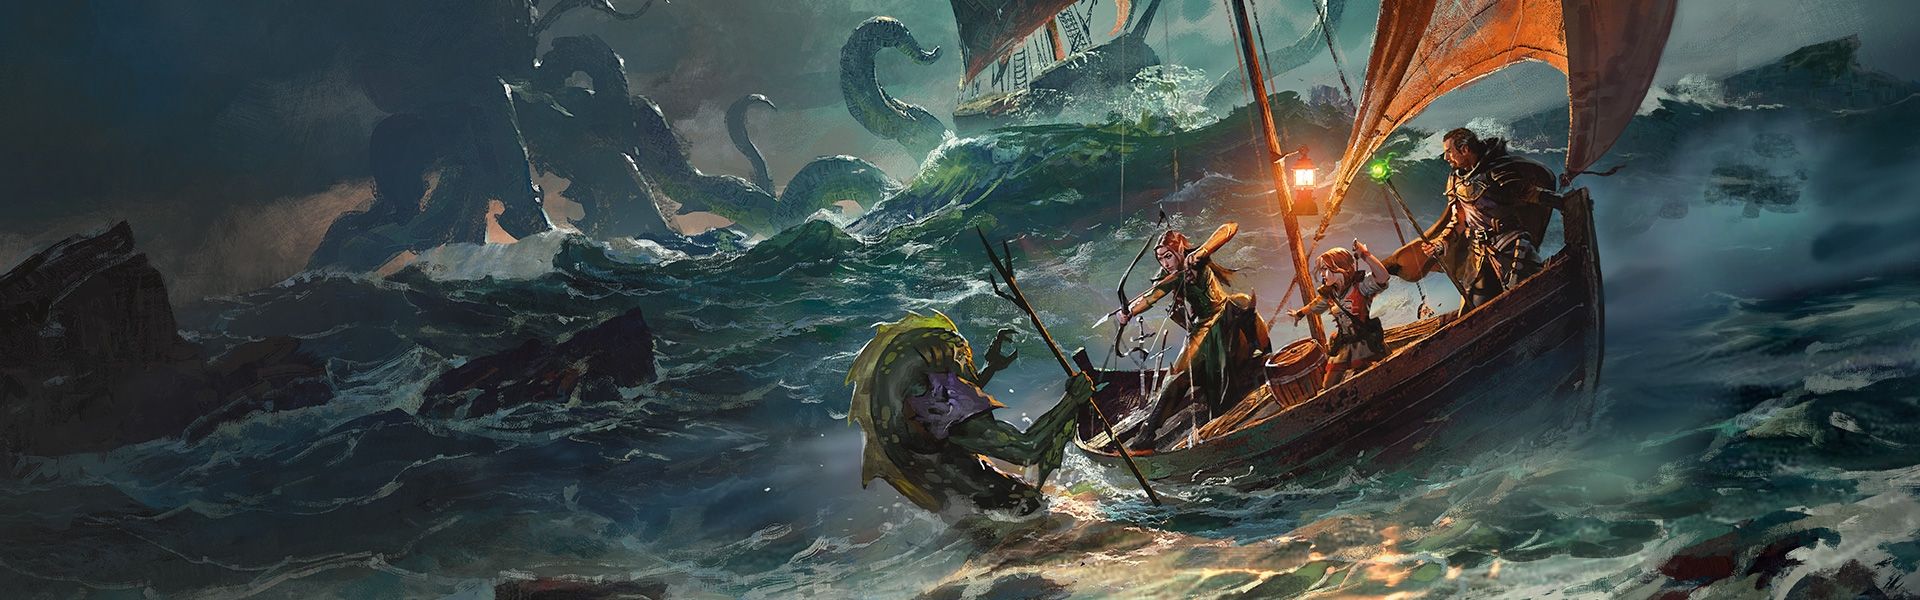 10 Dungeons & Dragons Campaigns That Would Make Great Movies